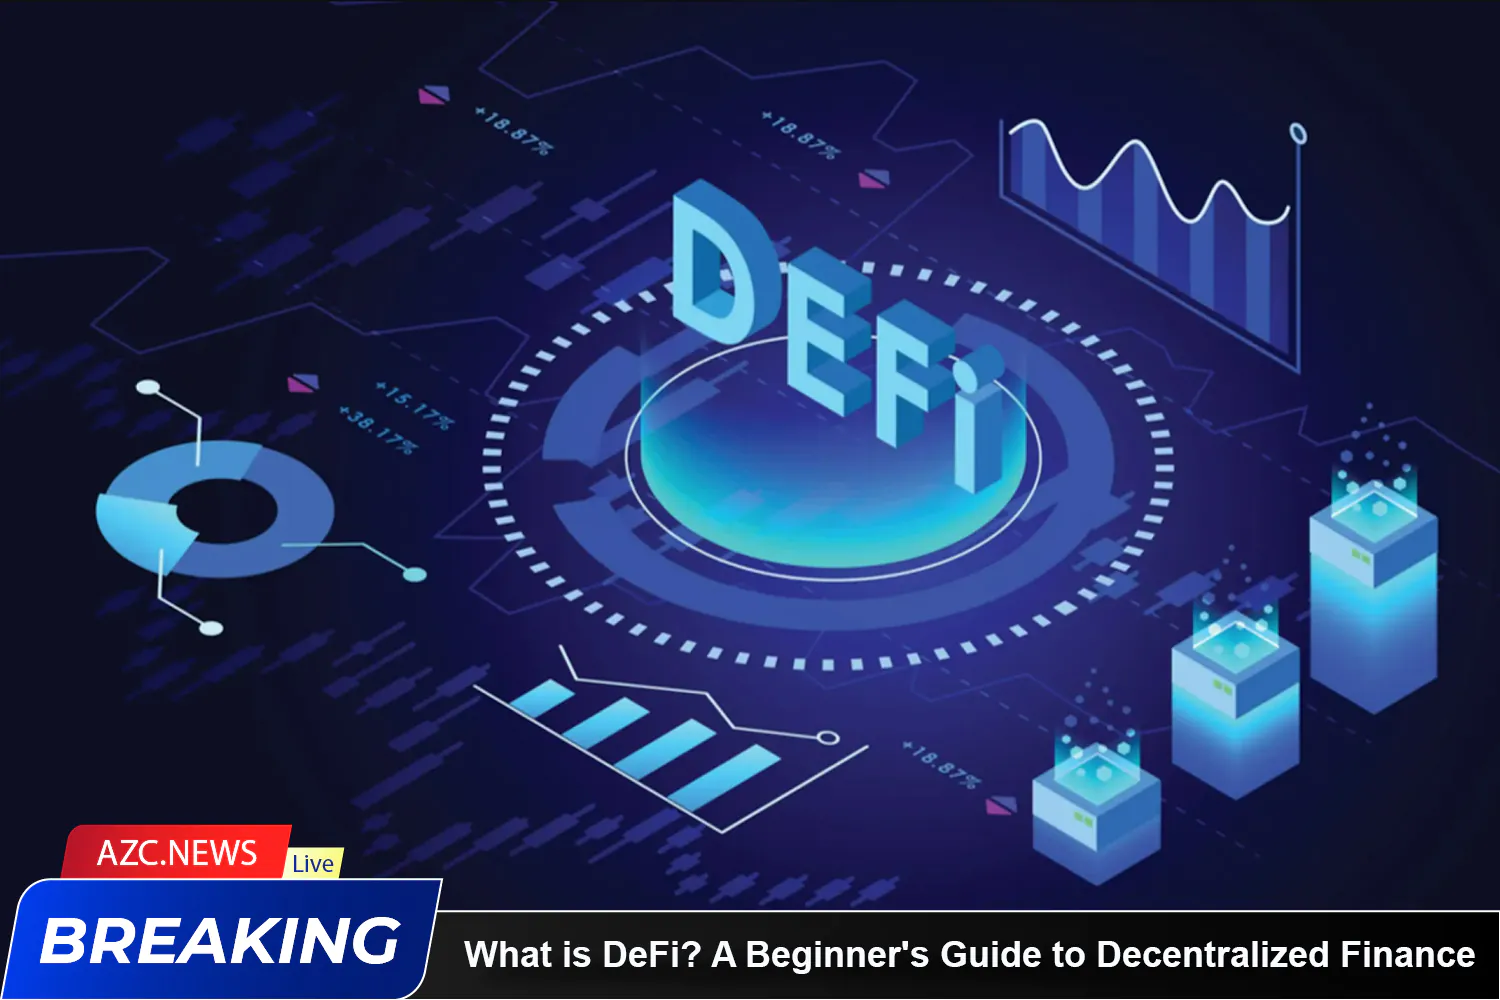 What Is Defi A Beginner's Guide To Decentralized Finance